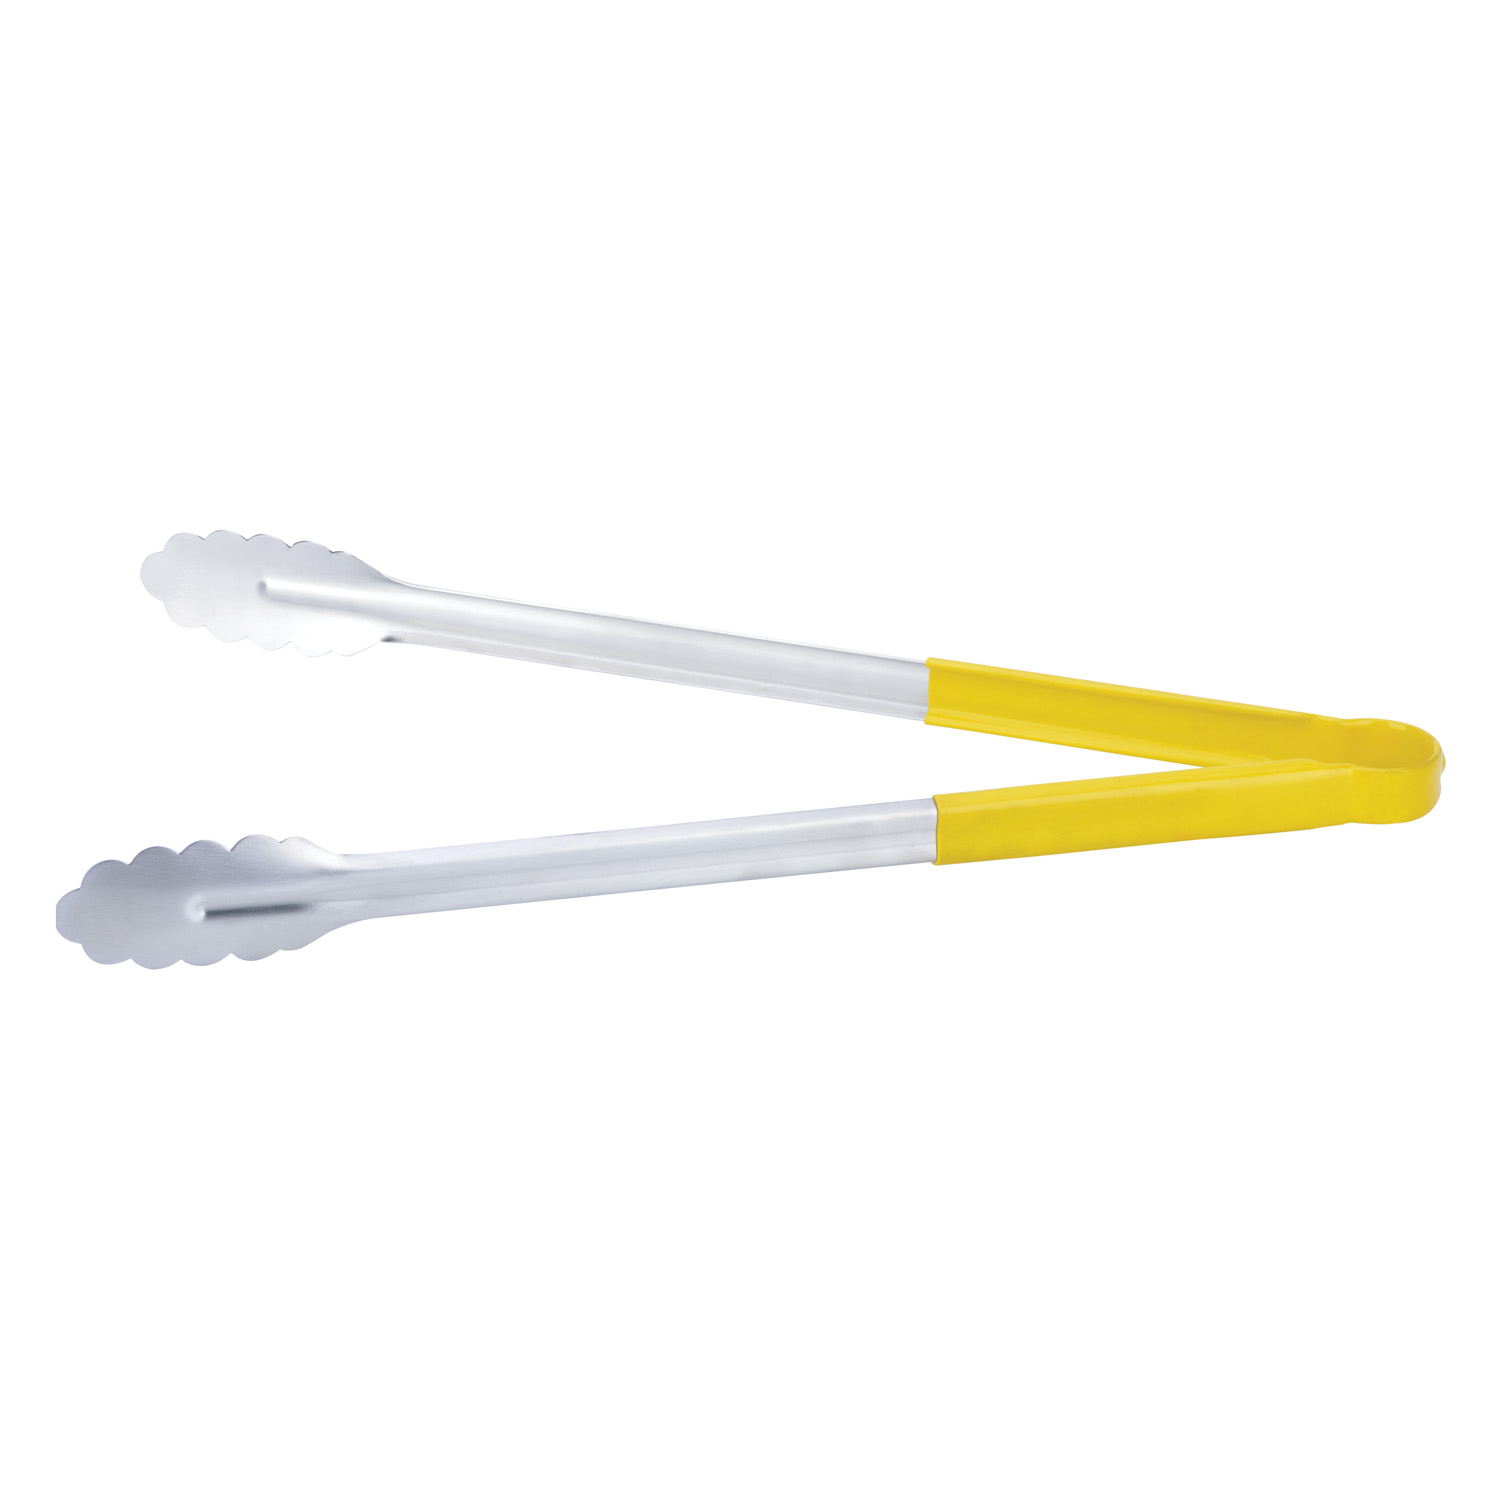 CAC China STCH-16YL Stainless Steel Tongs with Yellow Handle 16"